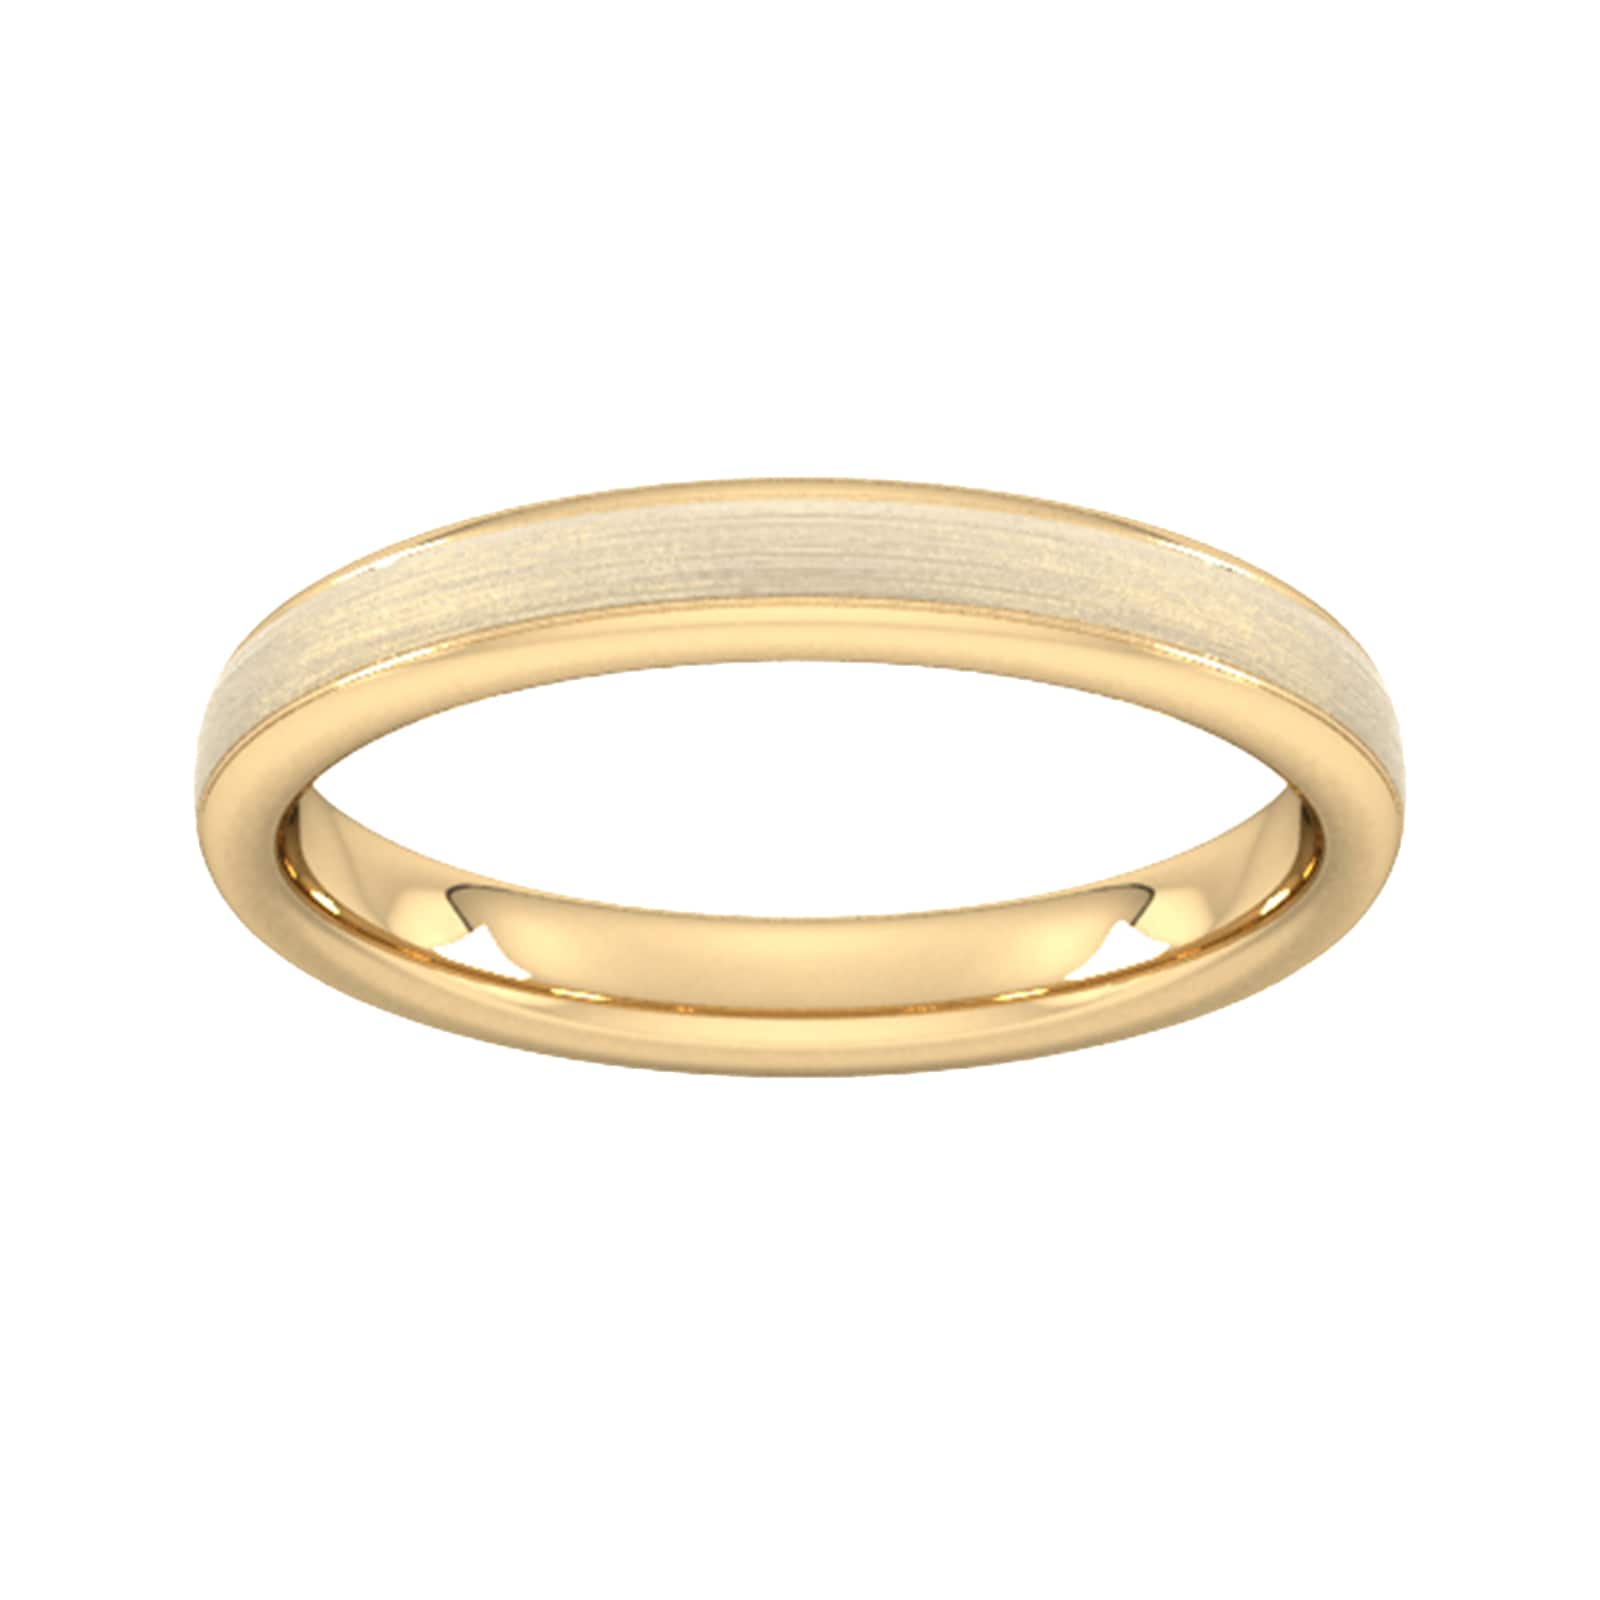 3mm Slight Court Heavy Matt Centre With Grooves Wedding Ring In 18 Carat Yellow Gold - Ring Size S